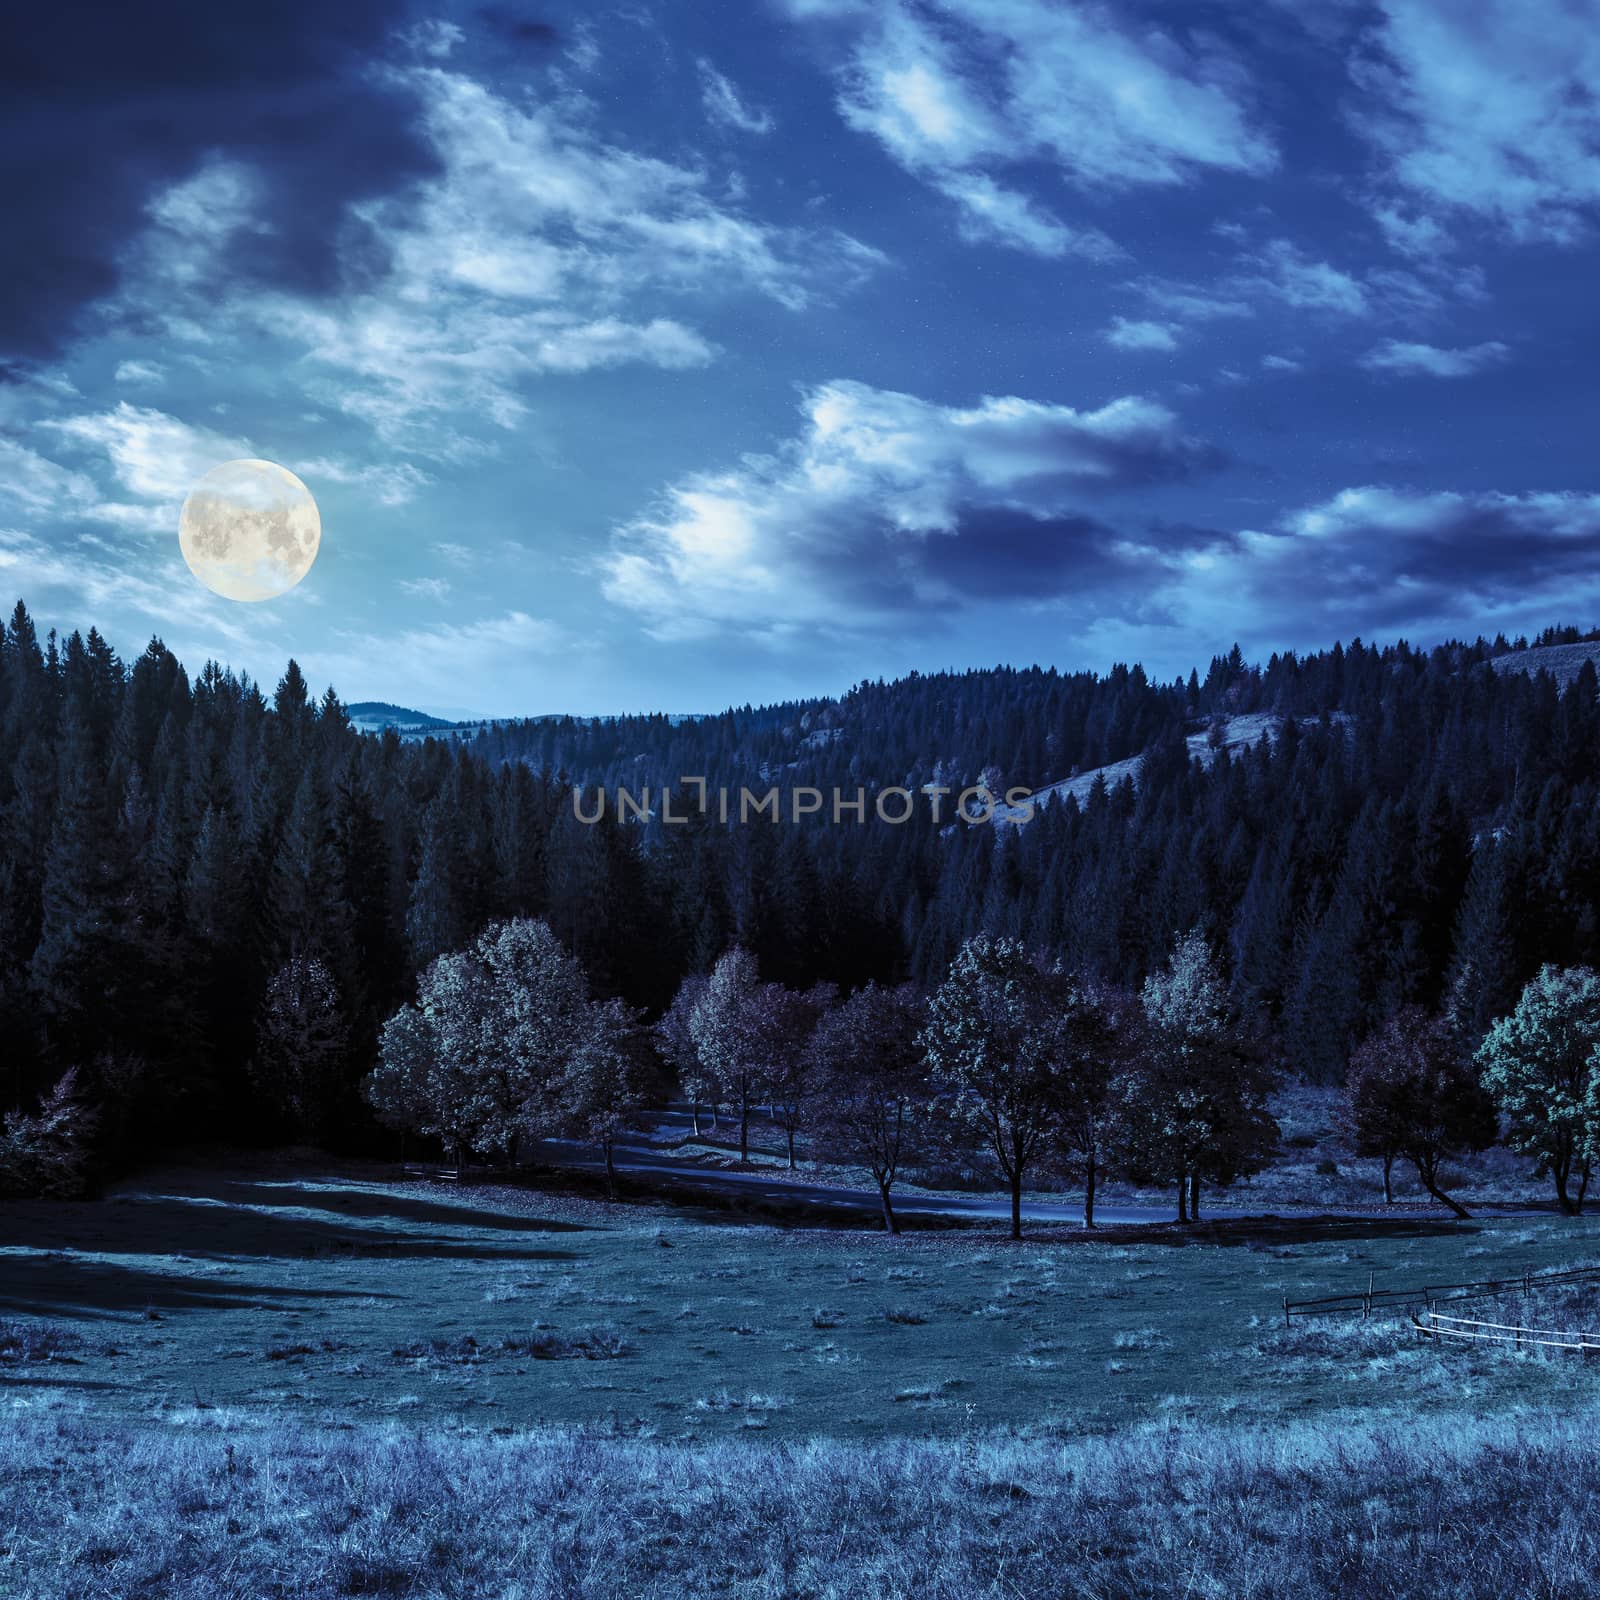 asphalt road going through green meadow with trees near autumn forest with foliage in mountains at night in full moon light